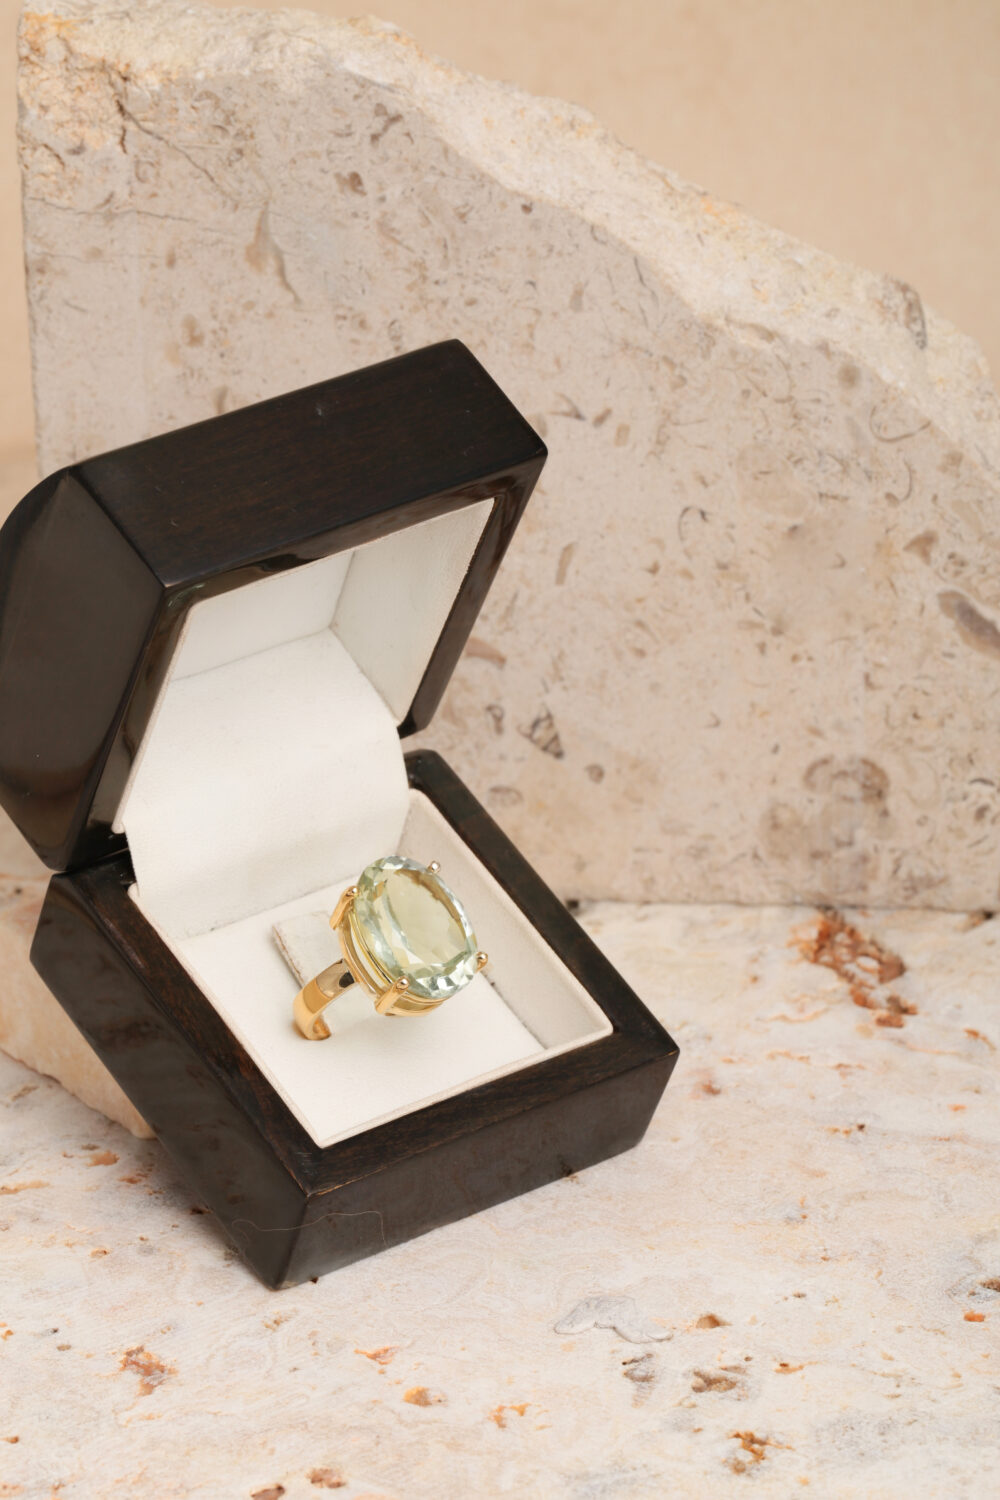 18-karat yellow gold ring set with a prasiolite gemstone. All our jewellery is handmade by jewellery designer Pascale Masselis in our Antwerp based atelier.